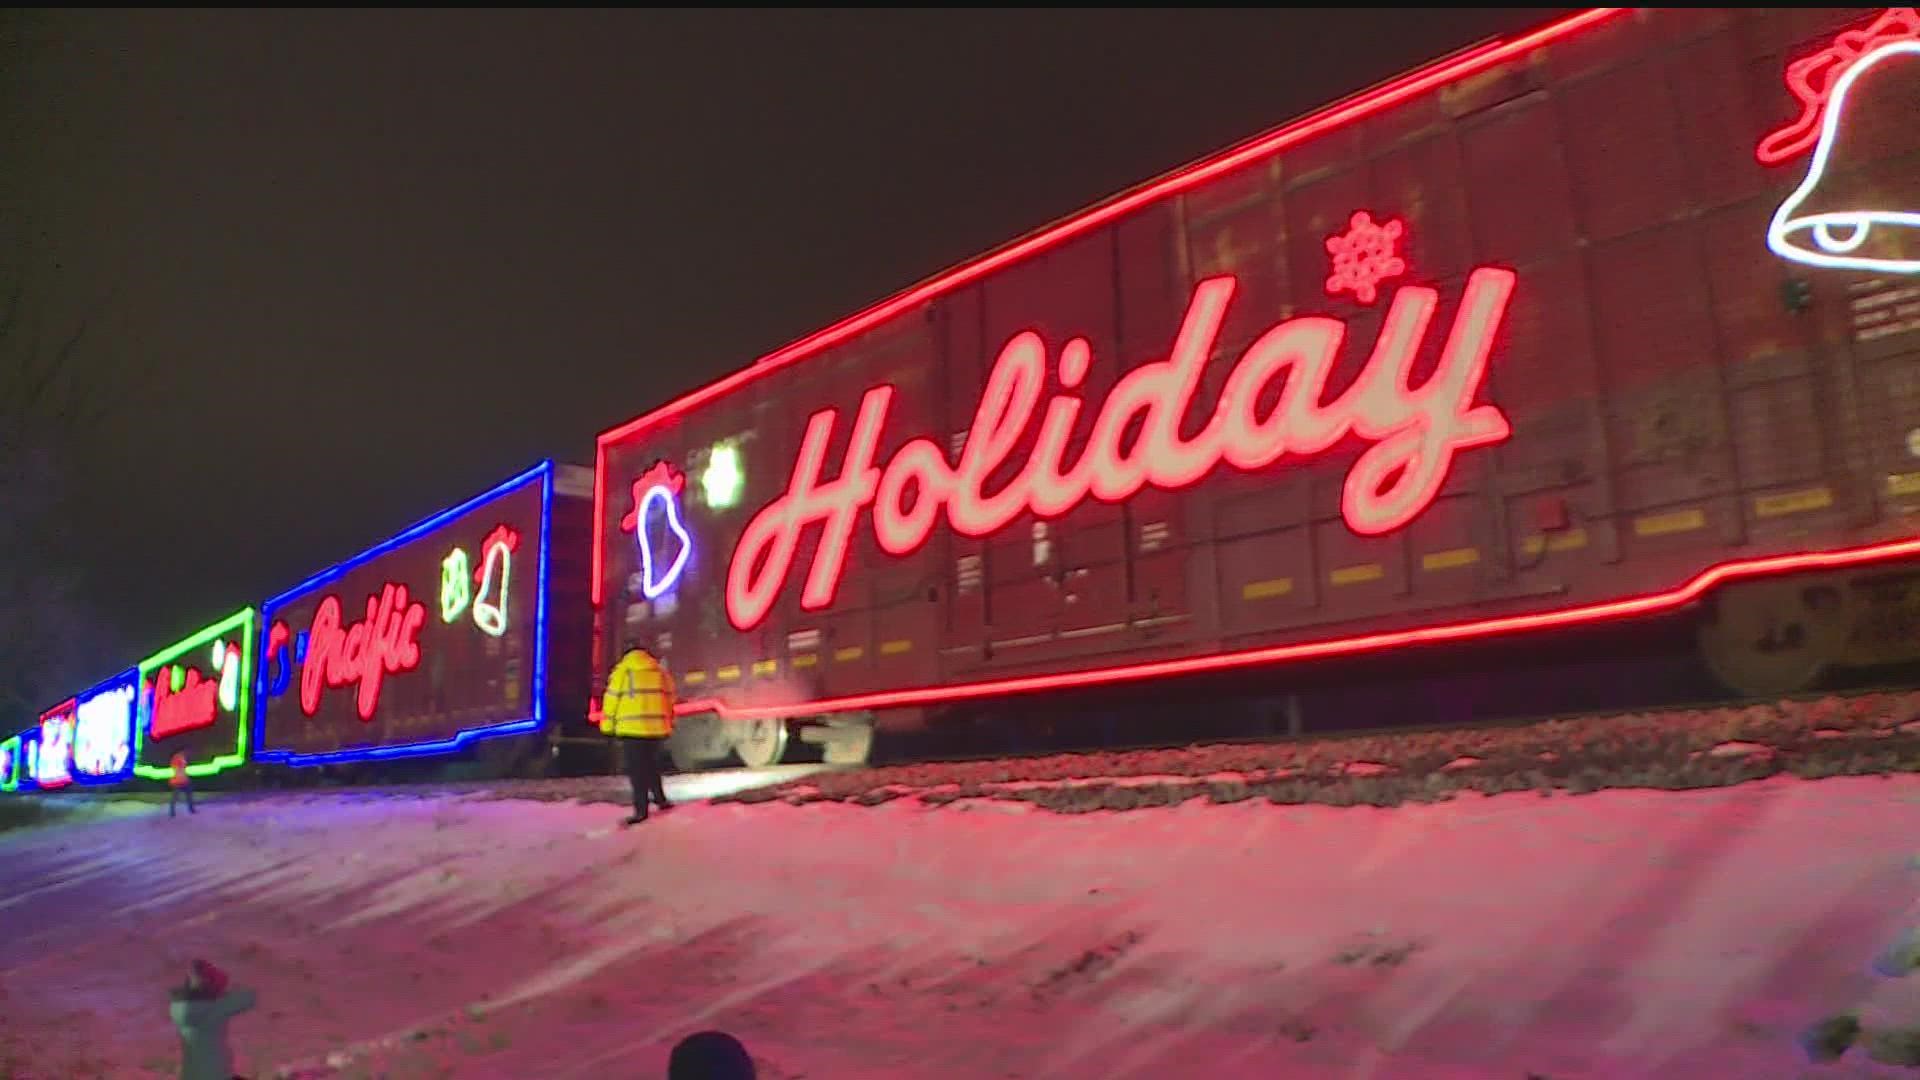 The Canadian Pacific Holiday Train will be making stops in Minnesota through Dec. 16.